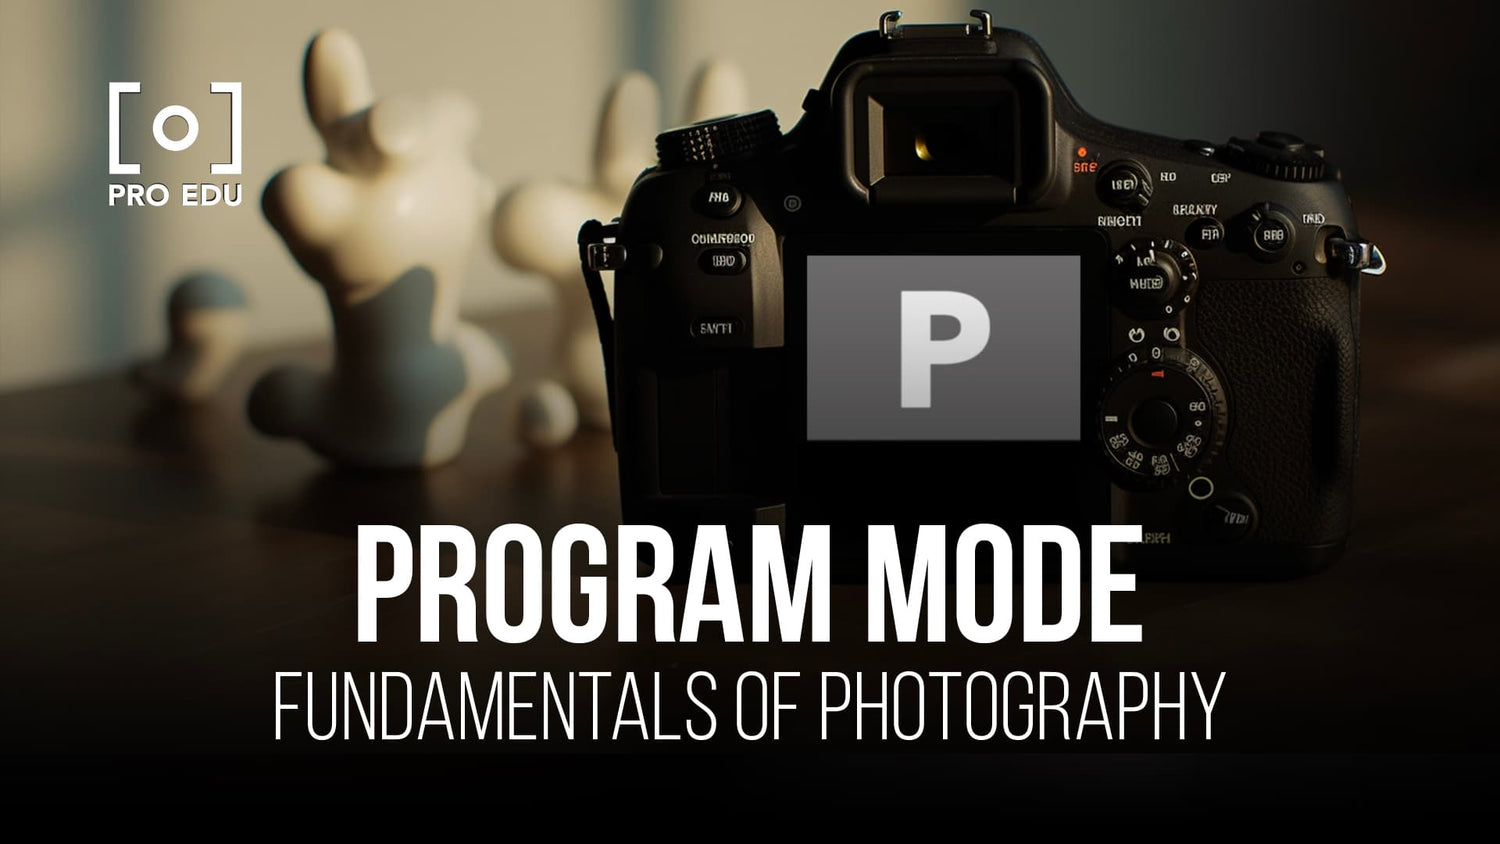 Balancing creativity and control with program mode in photography